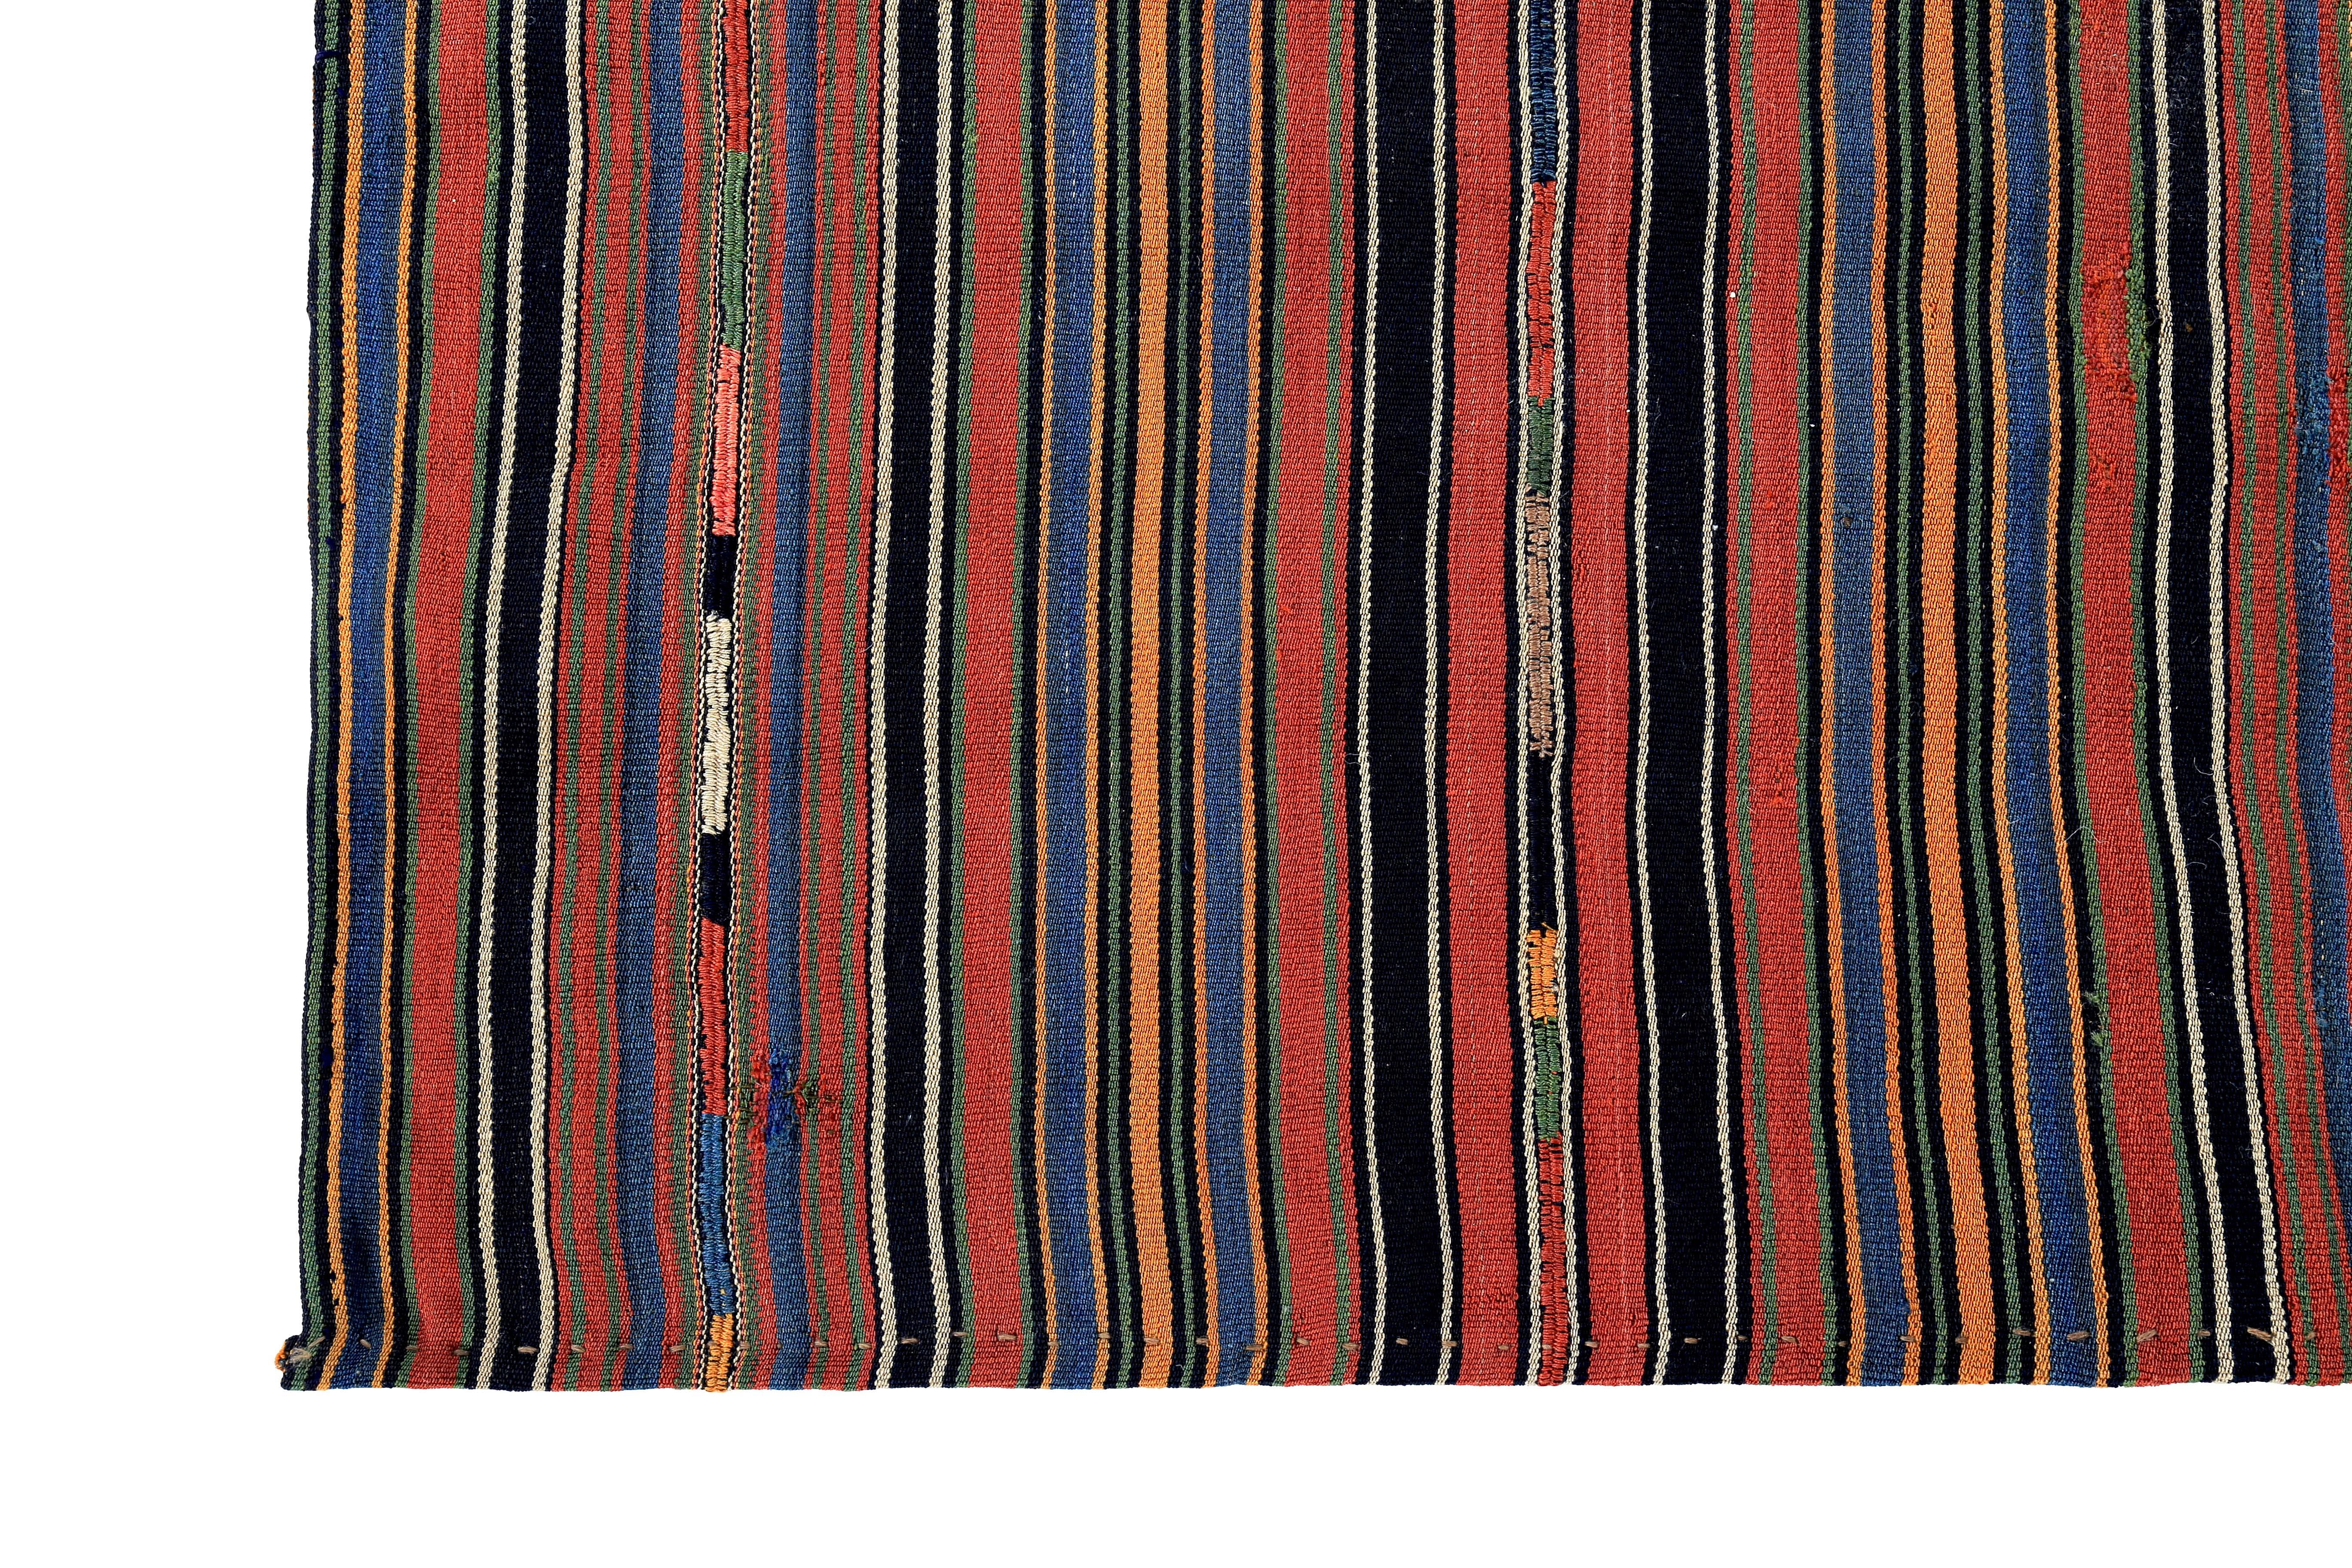 Hand-Woven Modern Turkish Kilim Rug with Orange, Black, Blue Pencil Stripes on Red Field For Sale